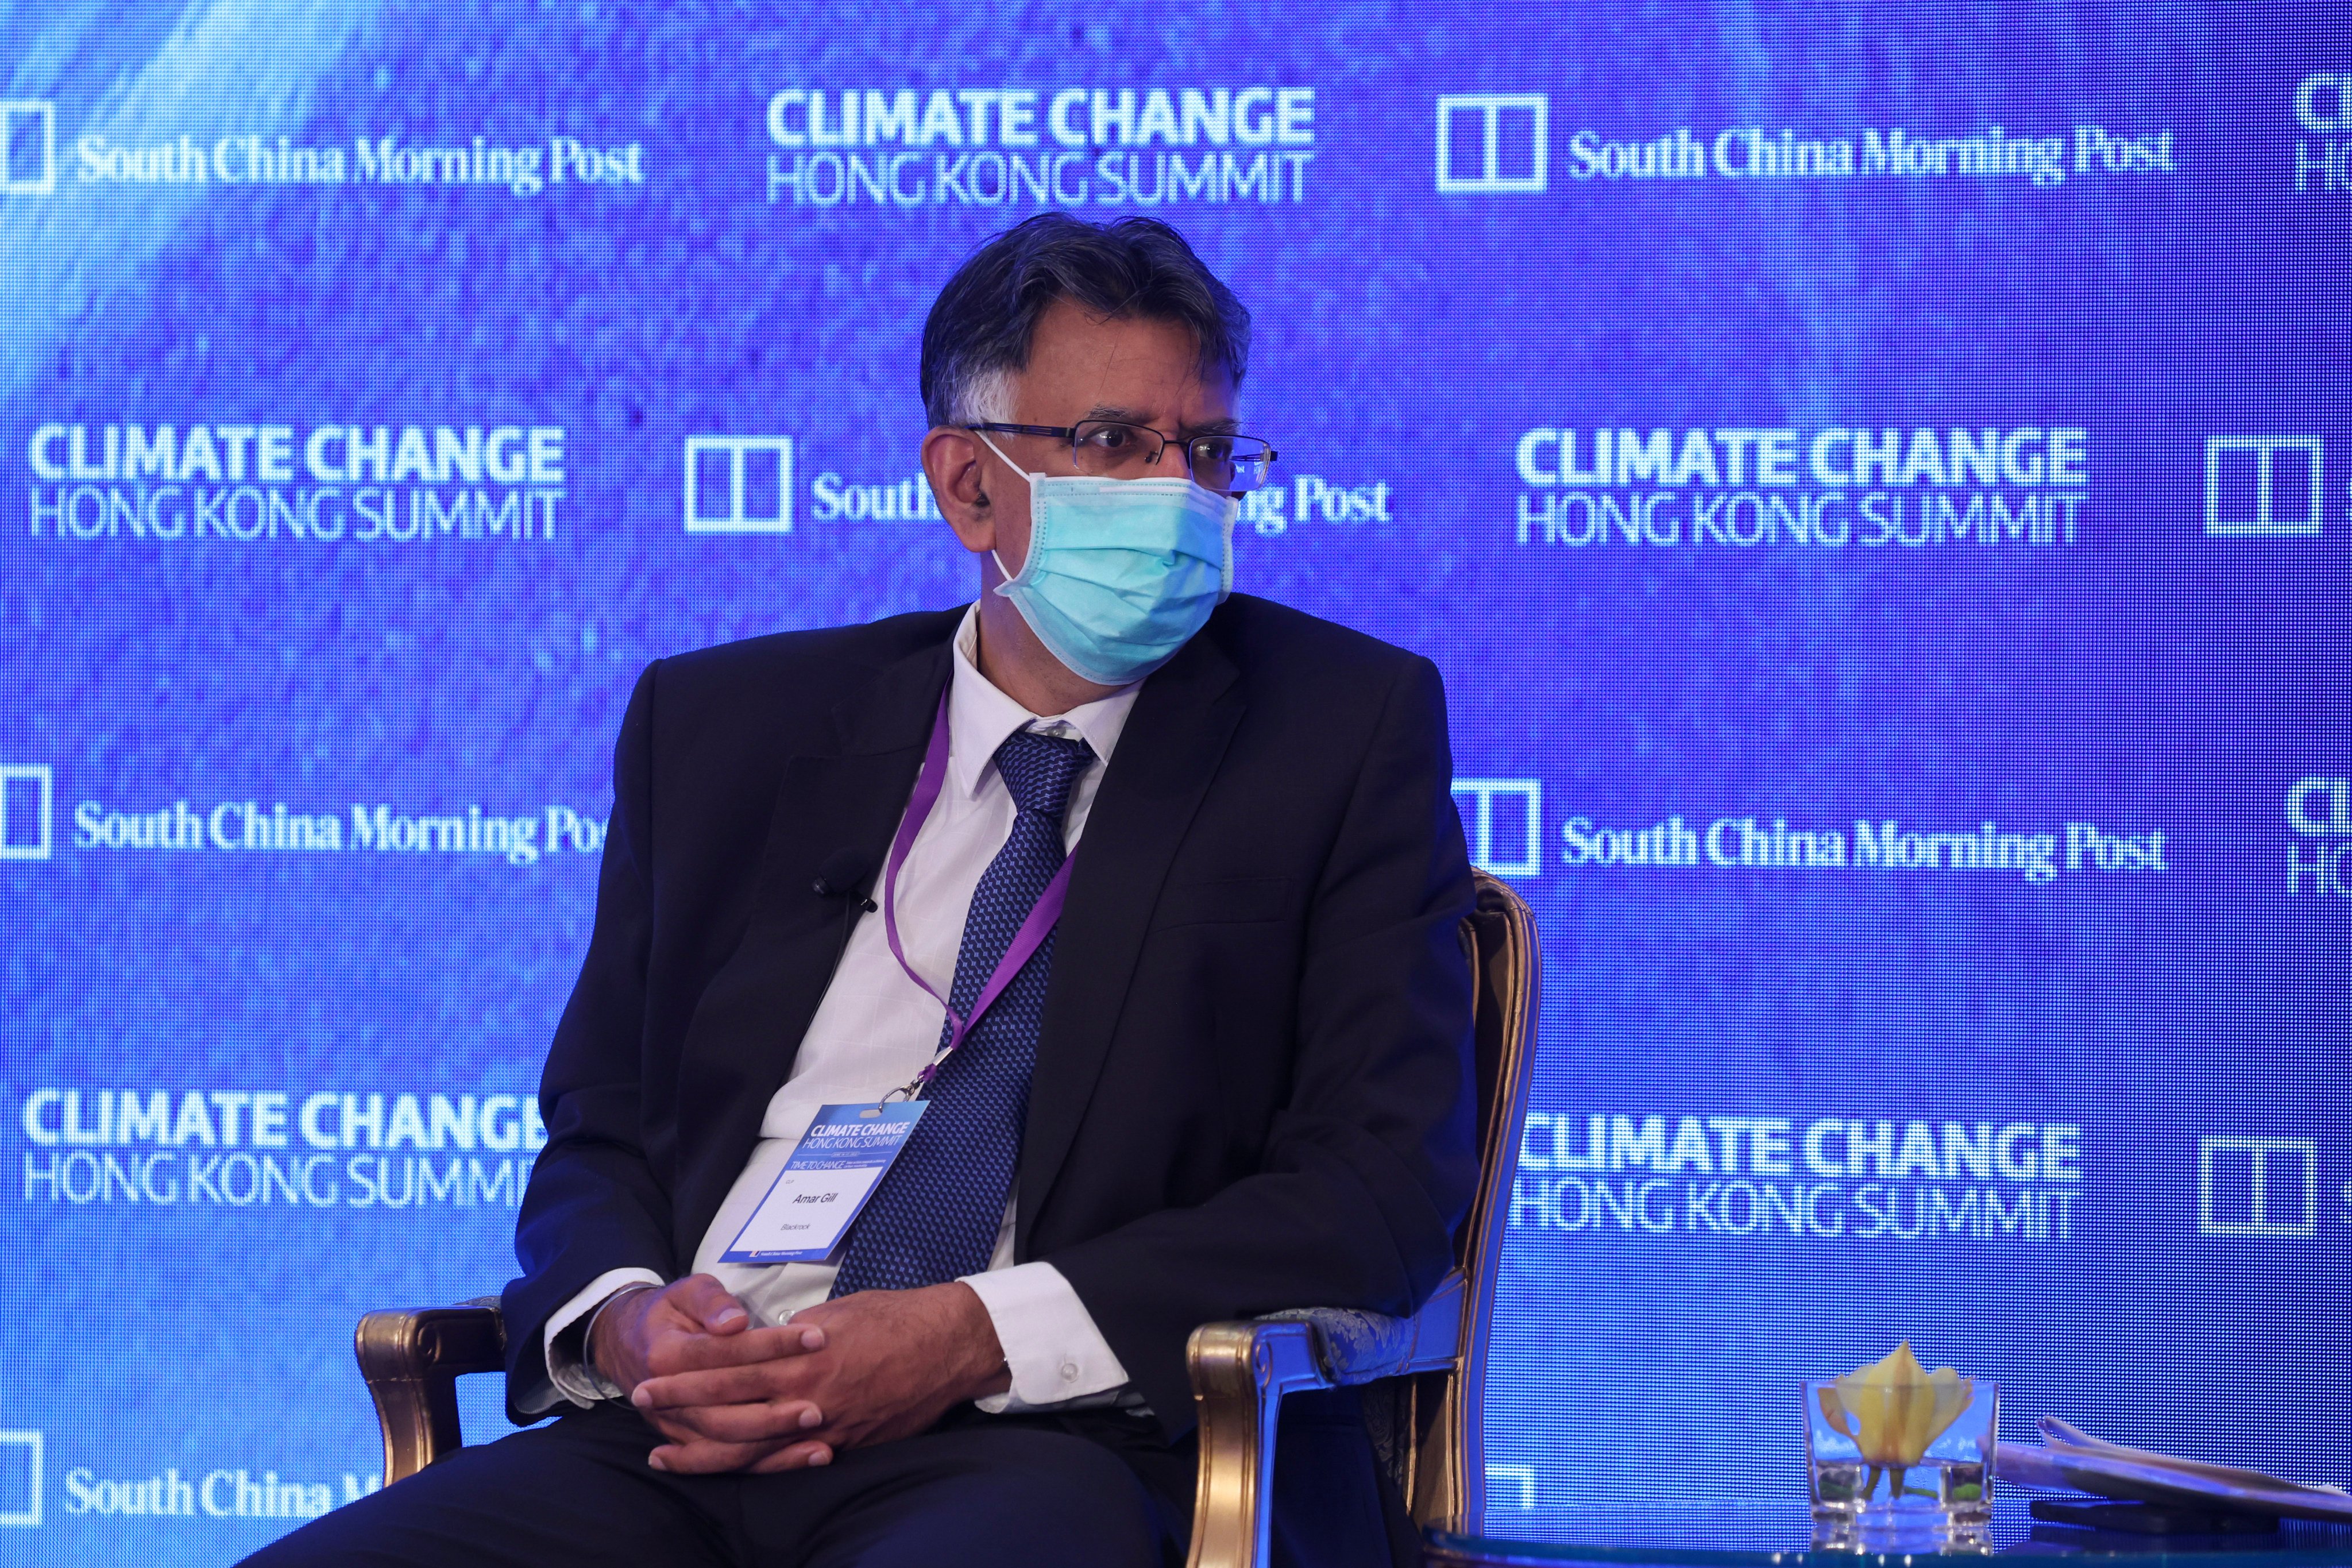 Amar Gill, managing director and head of investment stewardship in Asia-Pacific at Blackrock, takes part in a panel discussion at SCMP’s Climate Change Hong Kong Summit 2022 at Island Shangri La on June 16, 2022. Photo: SCMP / Yik Yeung-man